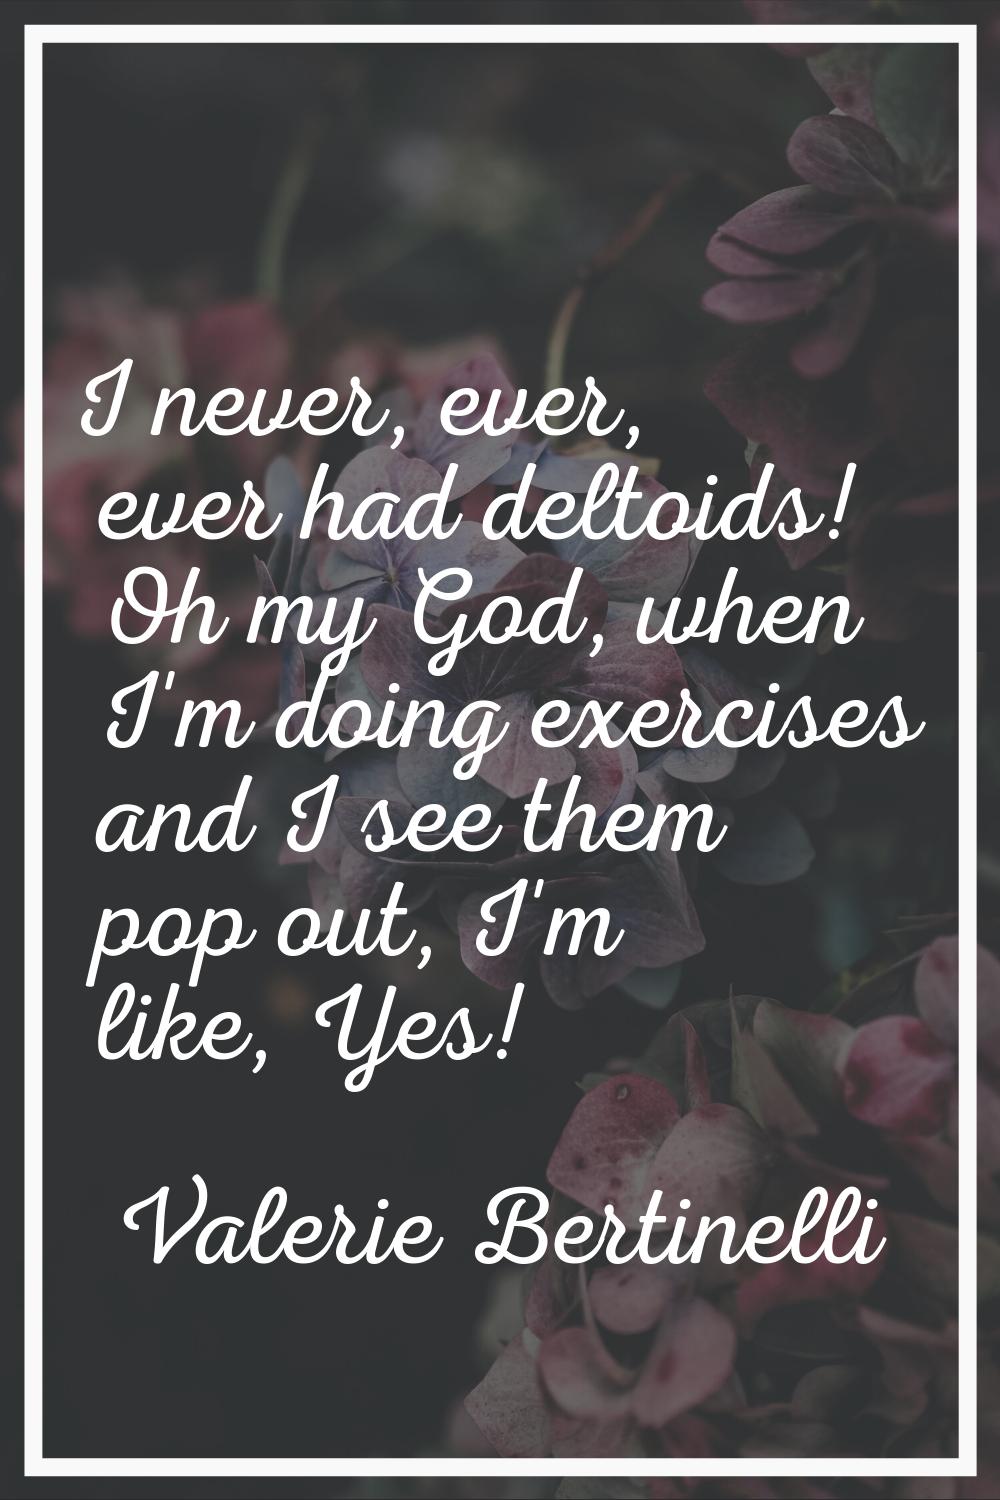 I never, ever, ever had deltoids! Oh my God, when I'm doing exercises and I see them pop out, I'm l